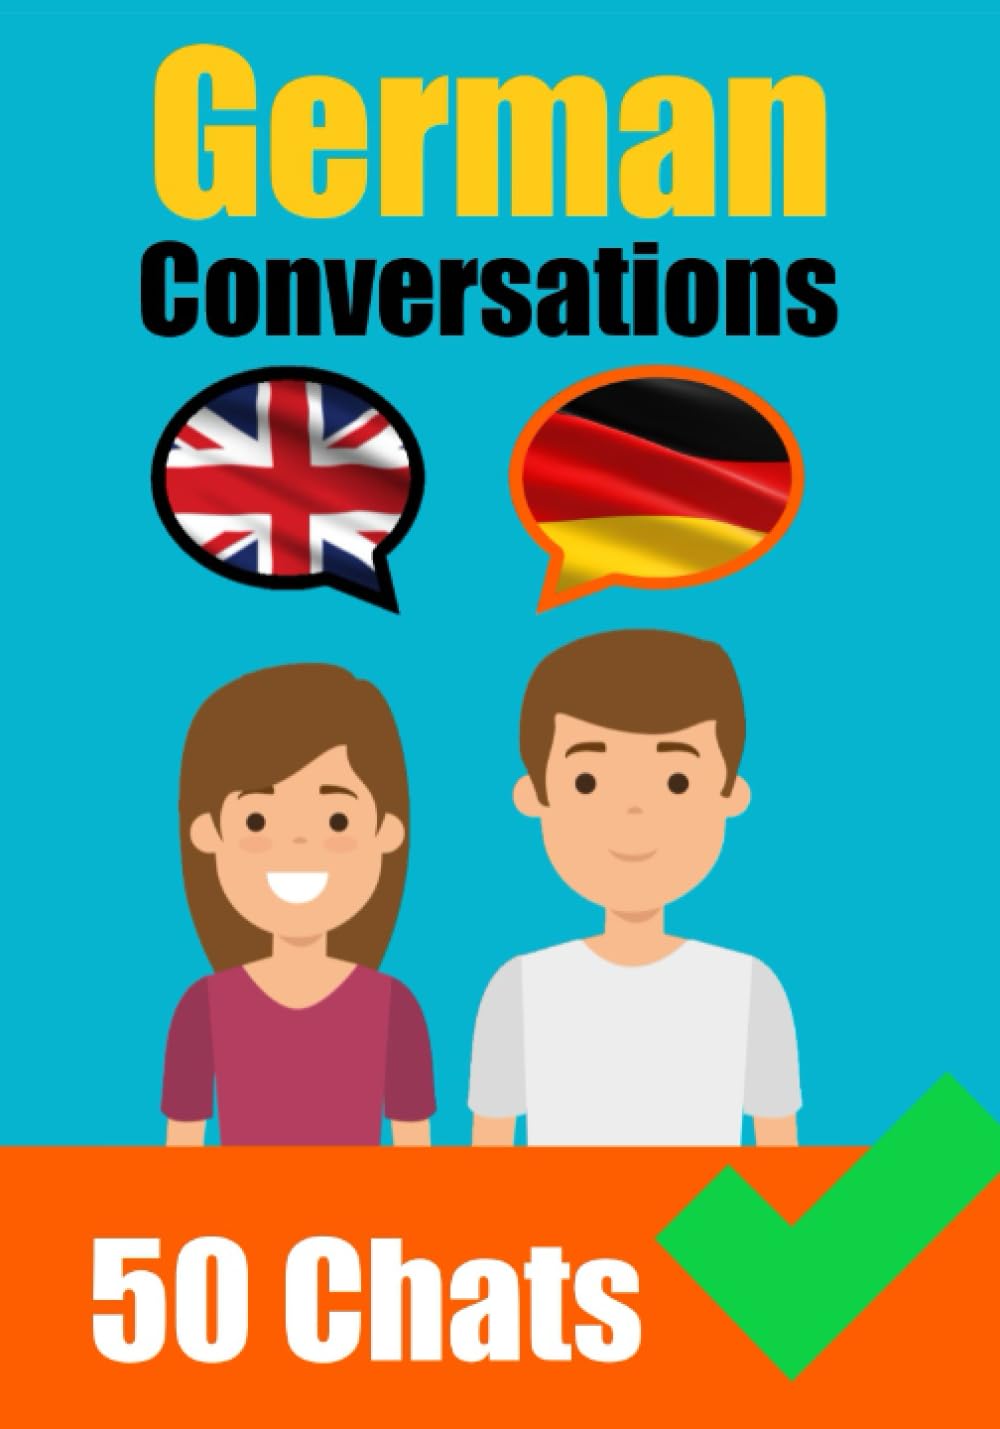 Conversations in German | English and German Conversation Side by Side - Skriuwer.com